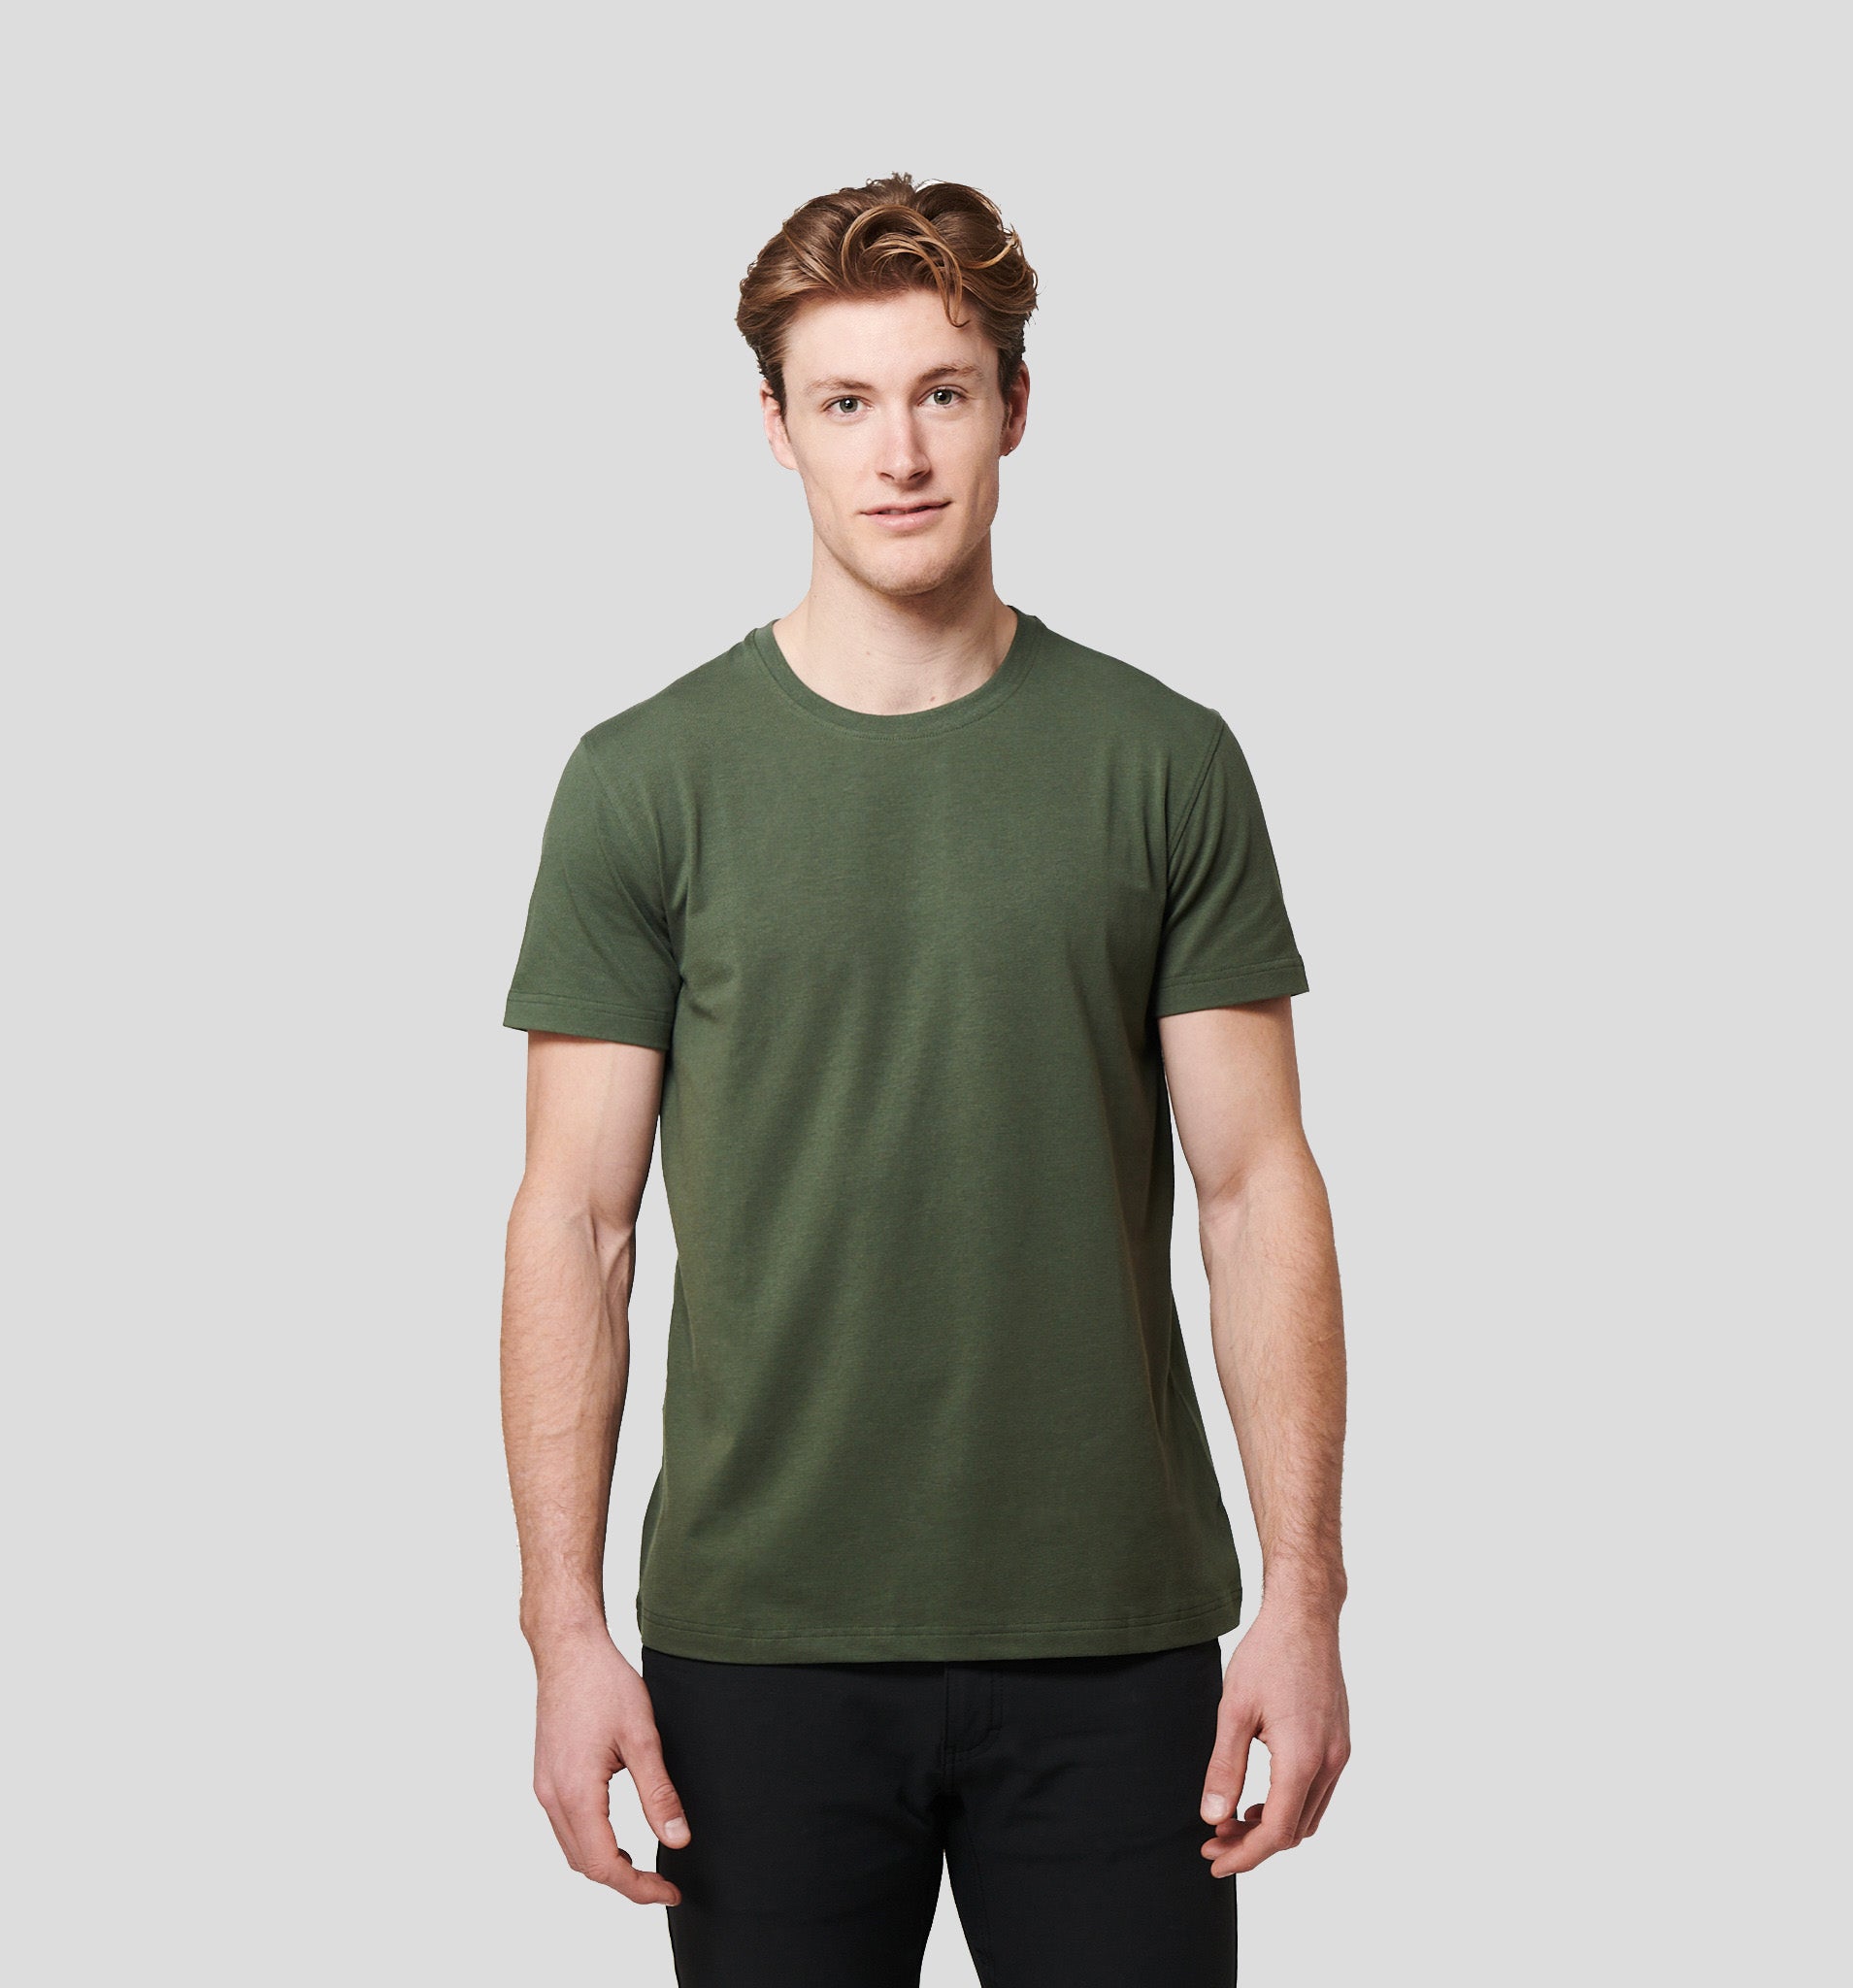 X Cotton Tee - Forest
